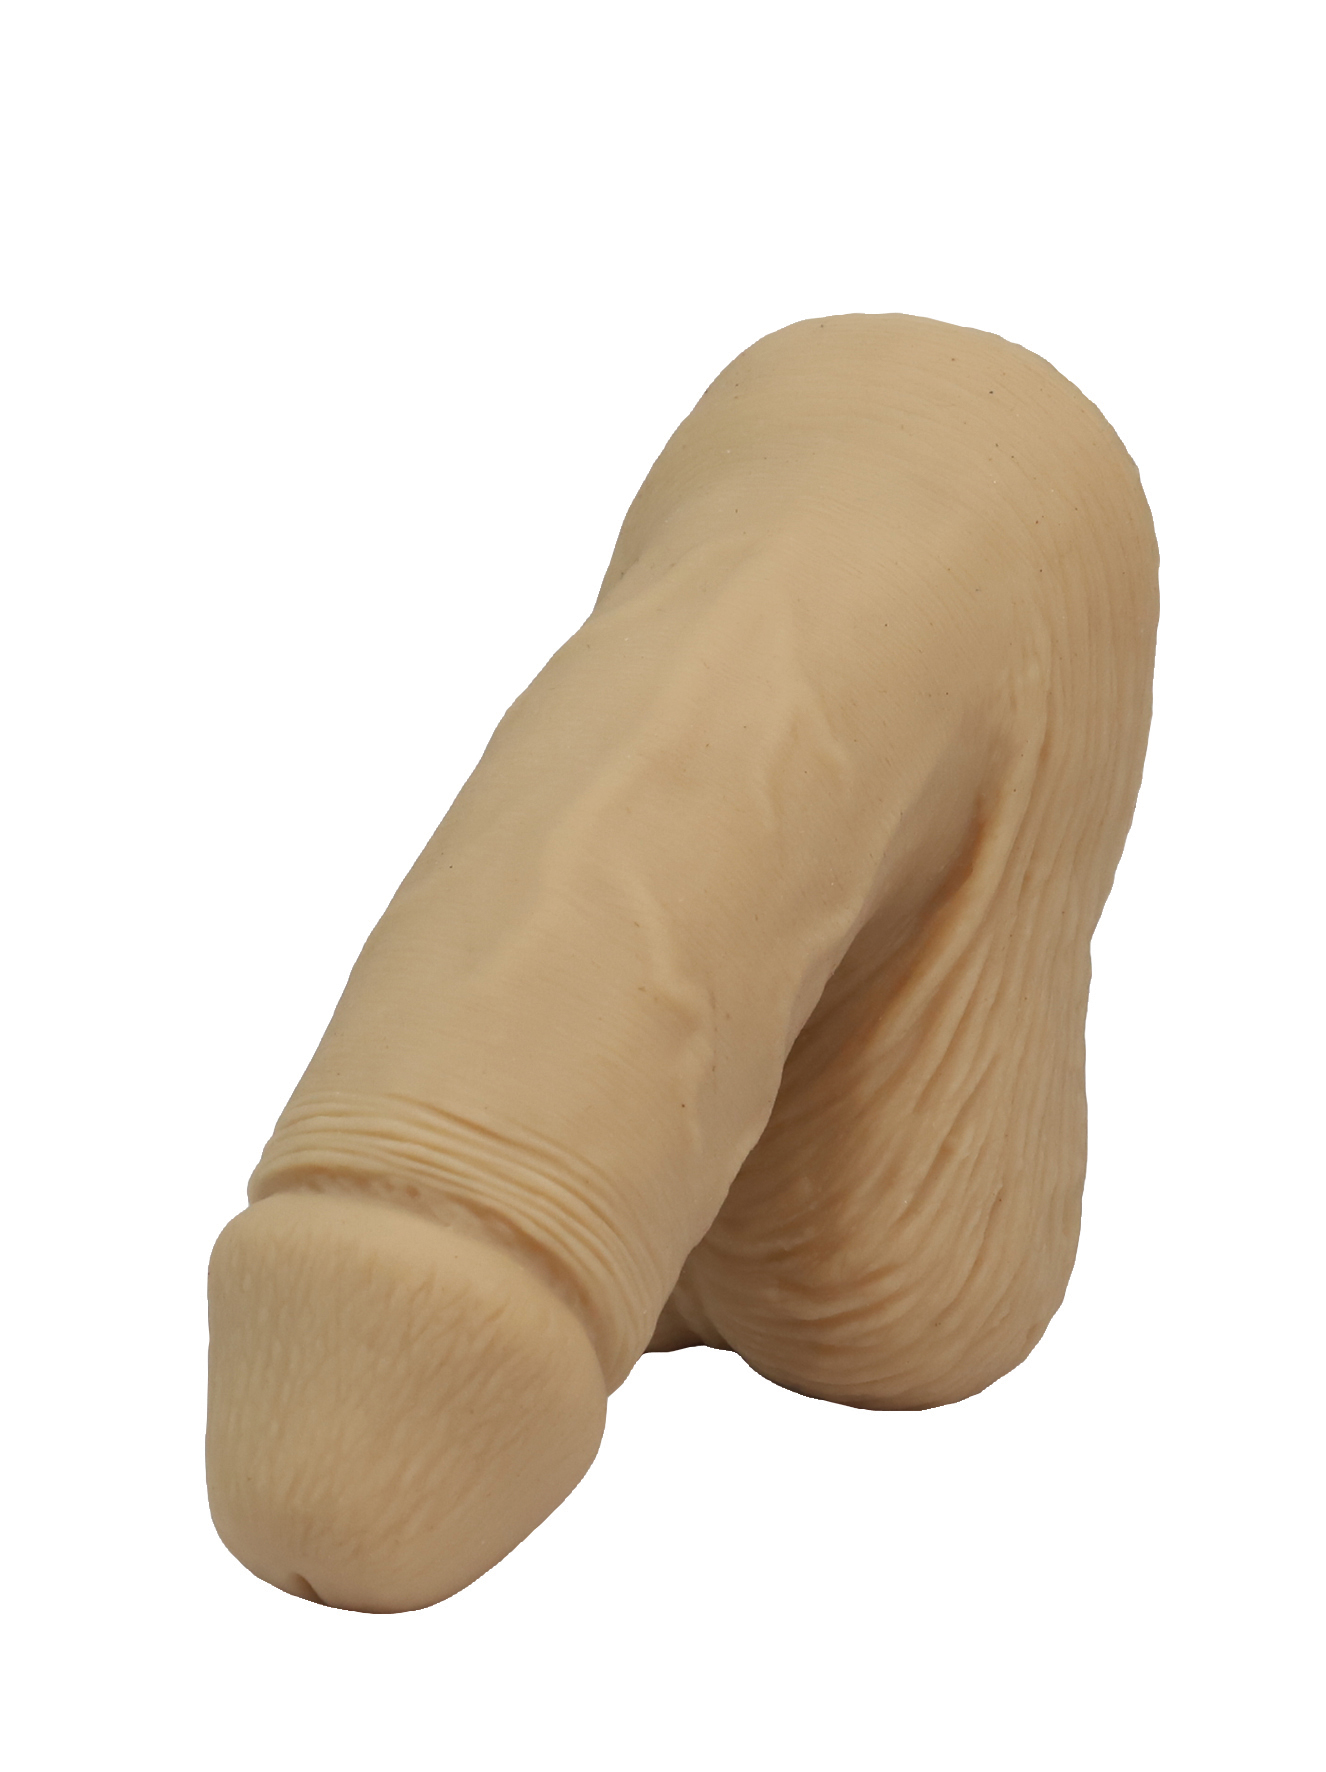 XX-DREAMSTOYS FTM Packer with panty Size S